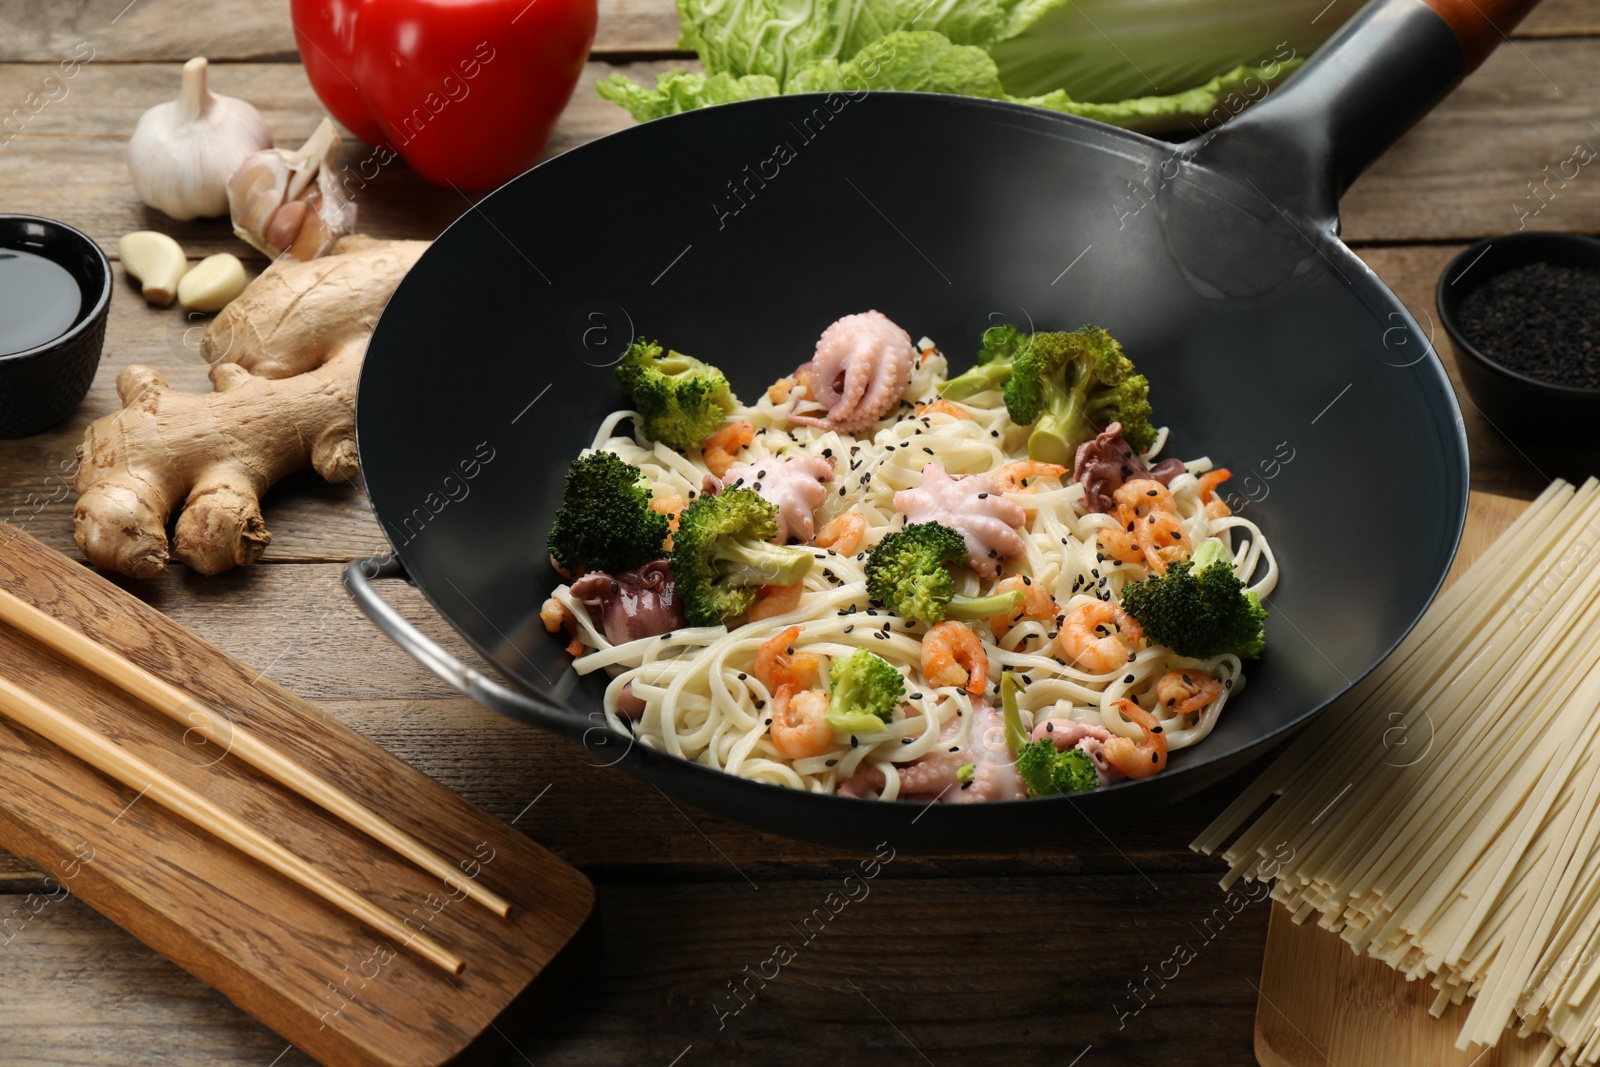 Photo of Stir fried noodles with seafood and vegetables in wok on wooden table